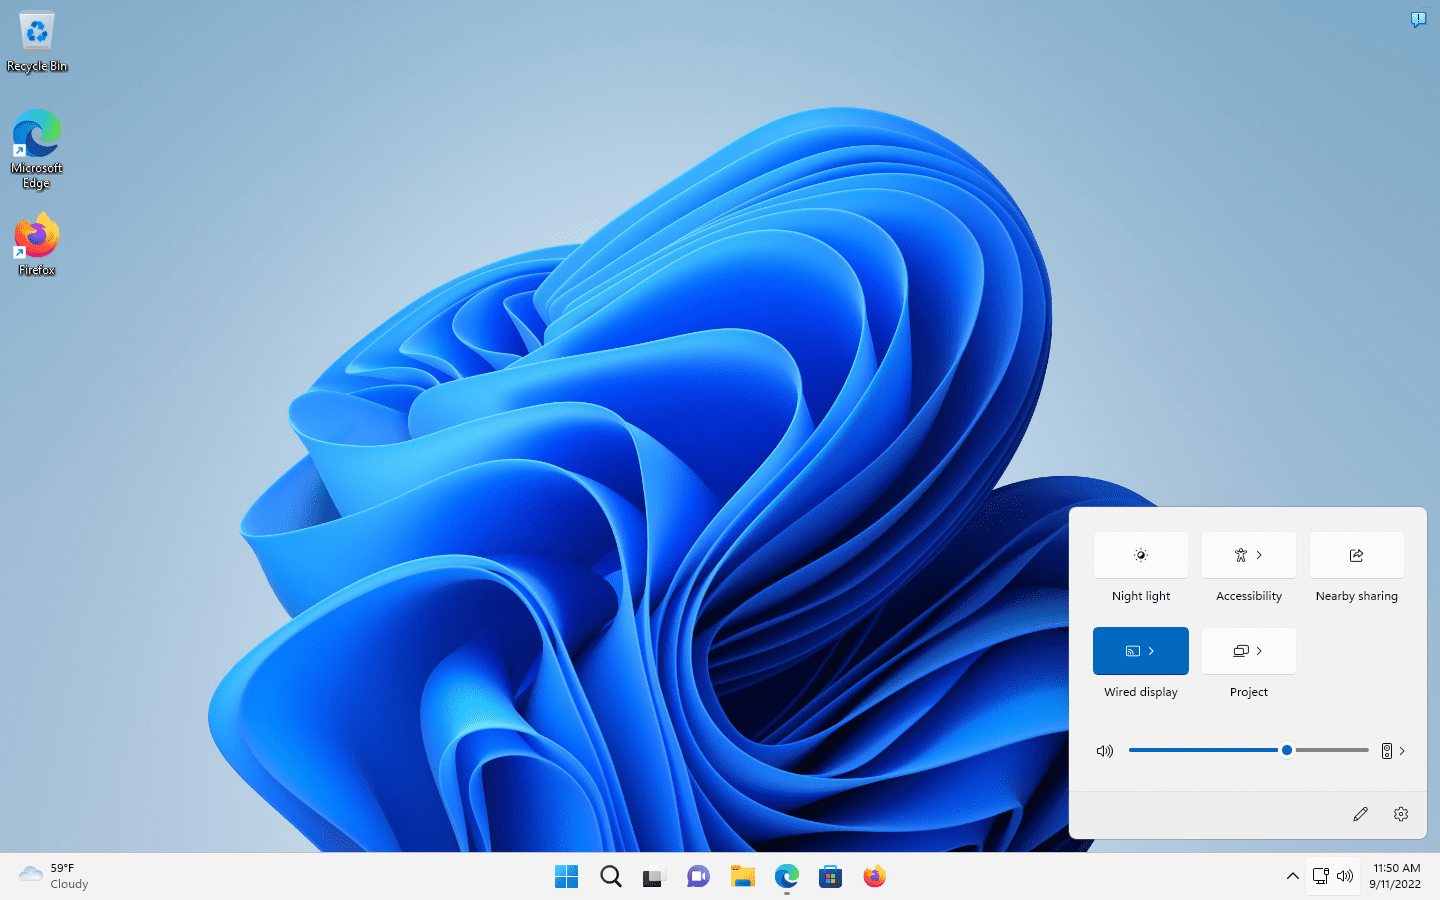 Windows 11 version 22H2: Focus Assist and Quick Settings improvements